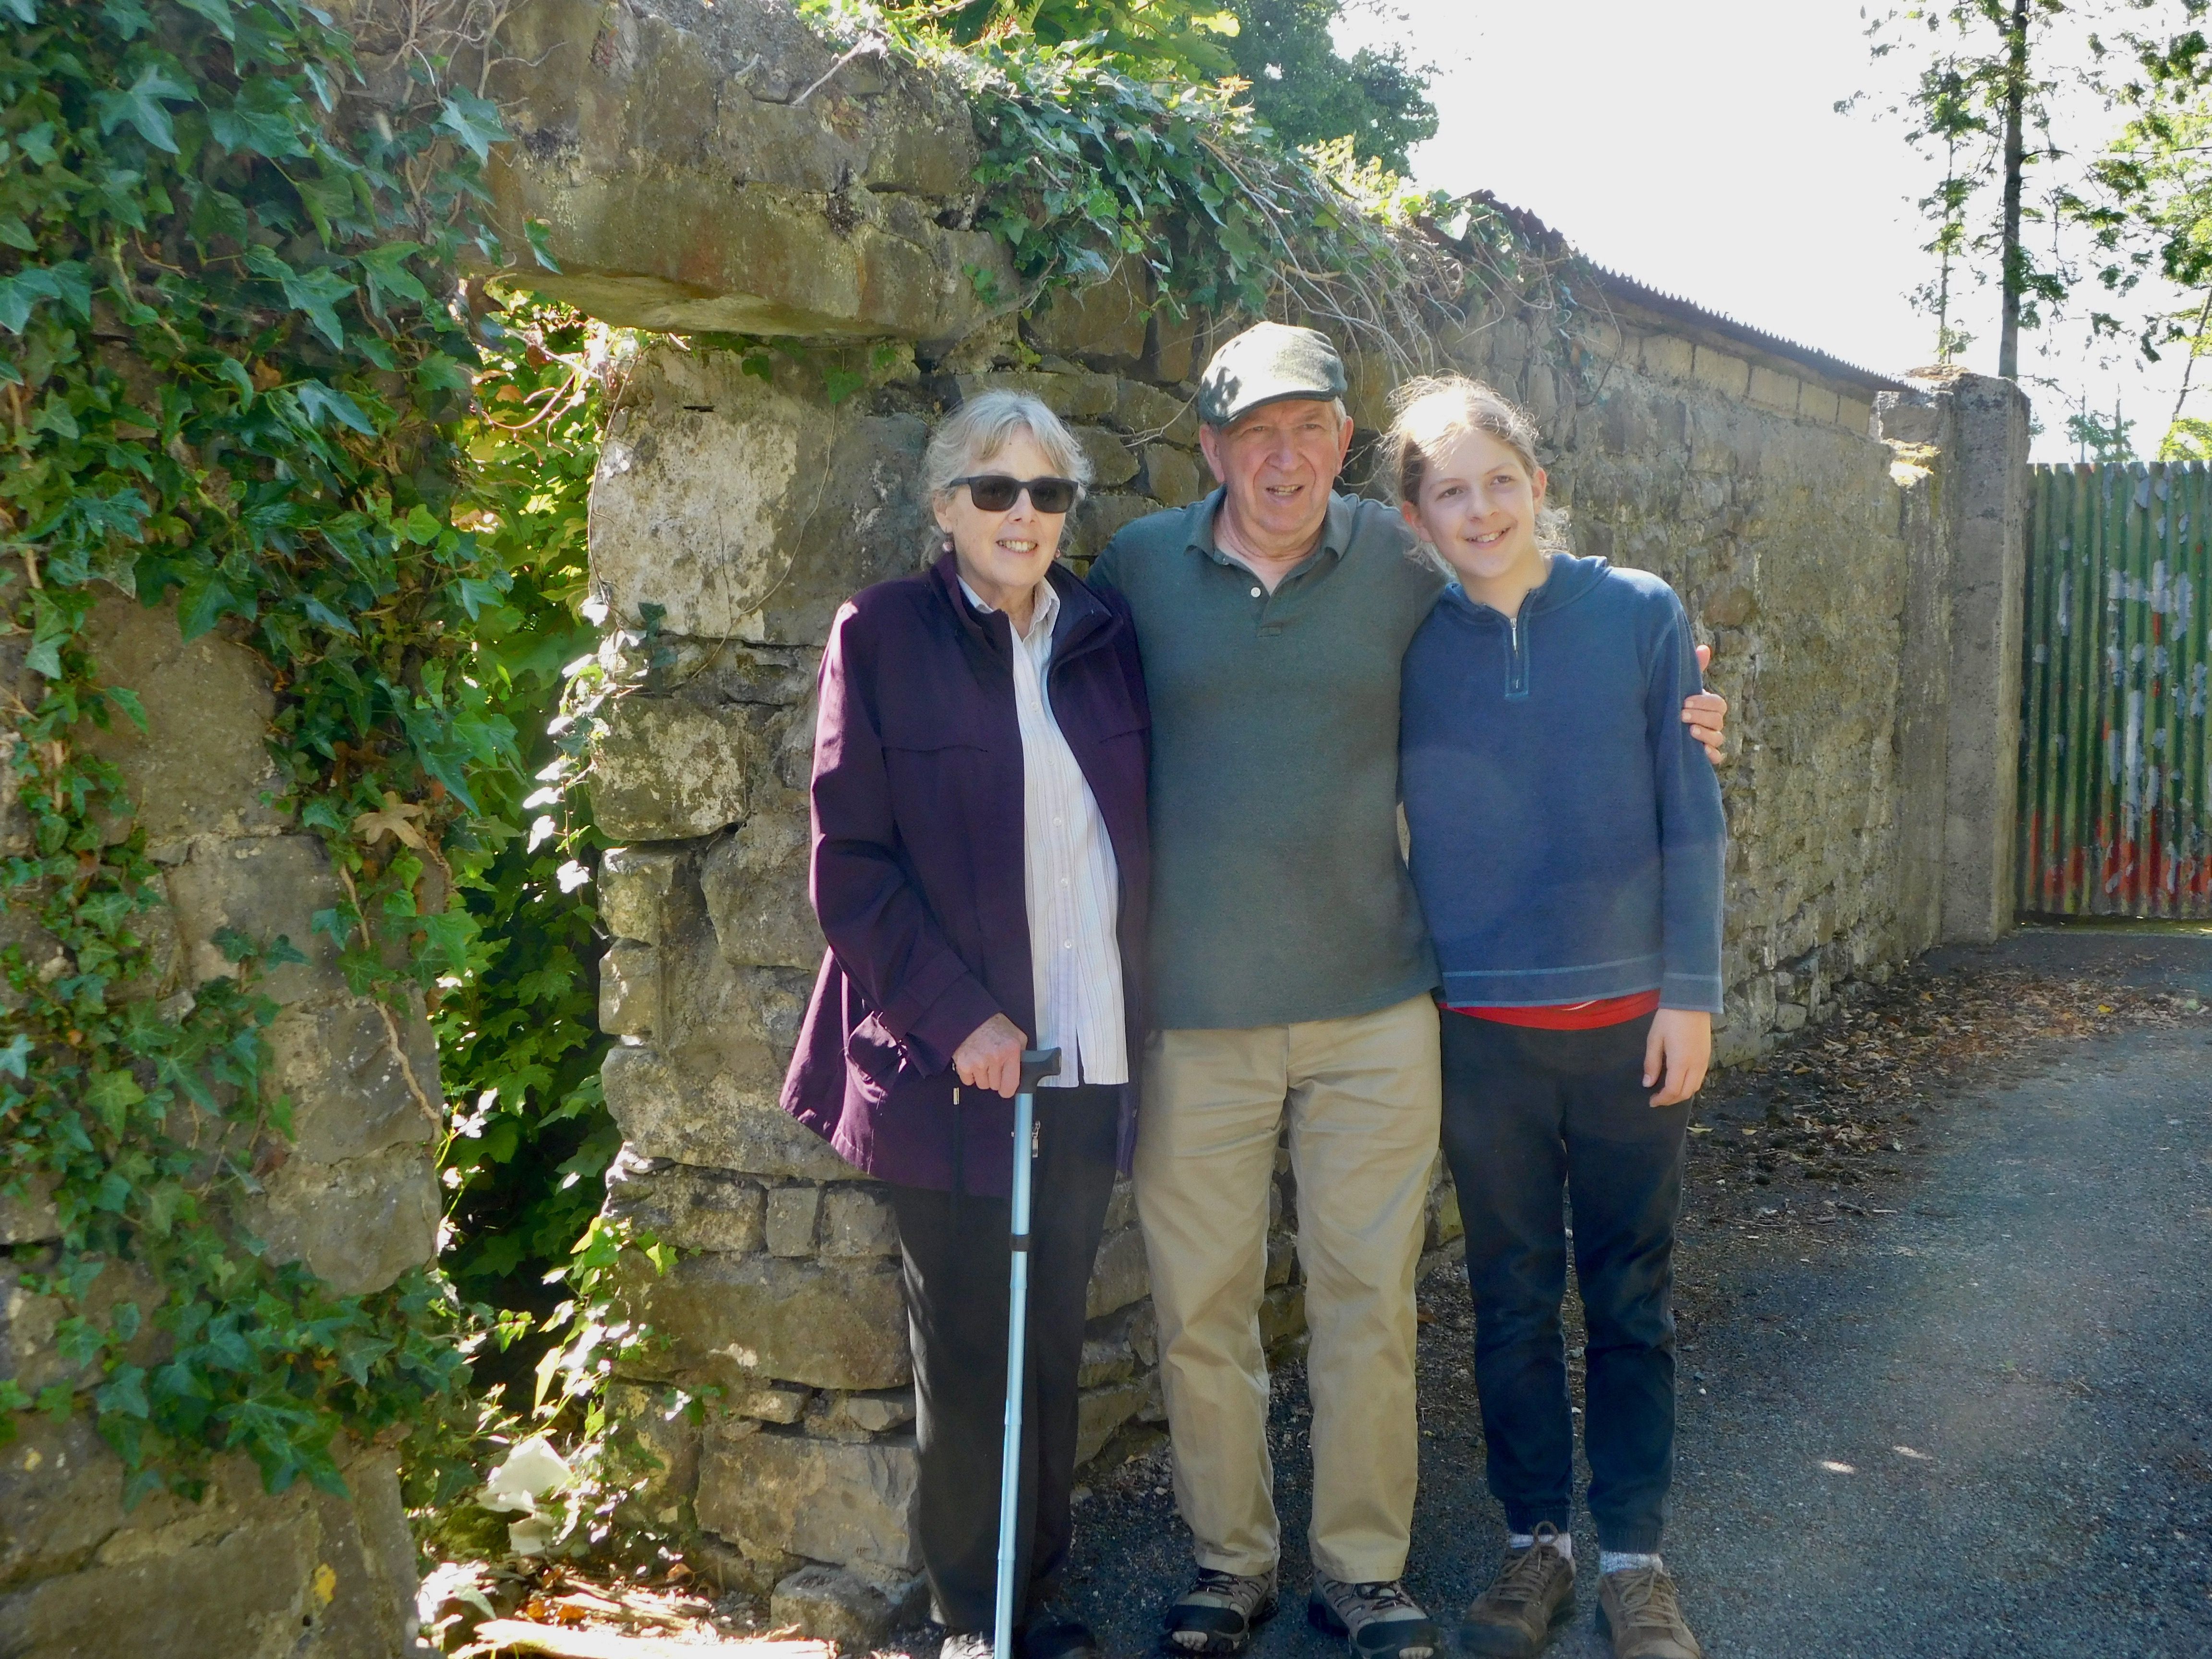 Kate, Mike and grandson Ben in front of tenement ruins on Pig's Foot Lane in Templemore, Co. Tipperary where Kate's great grandmother Mary Waters was born in 1831.